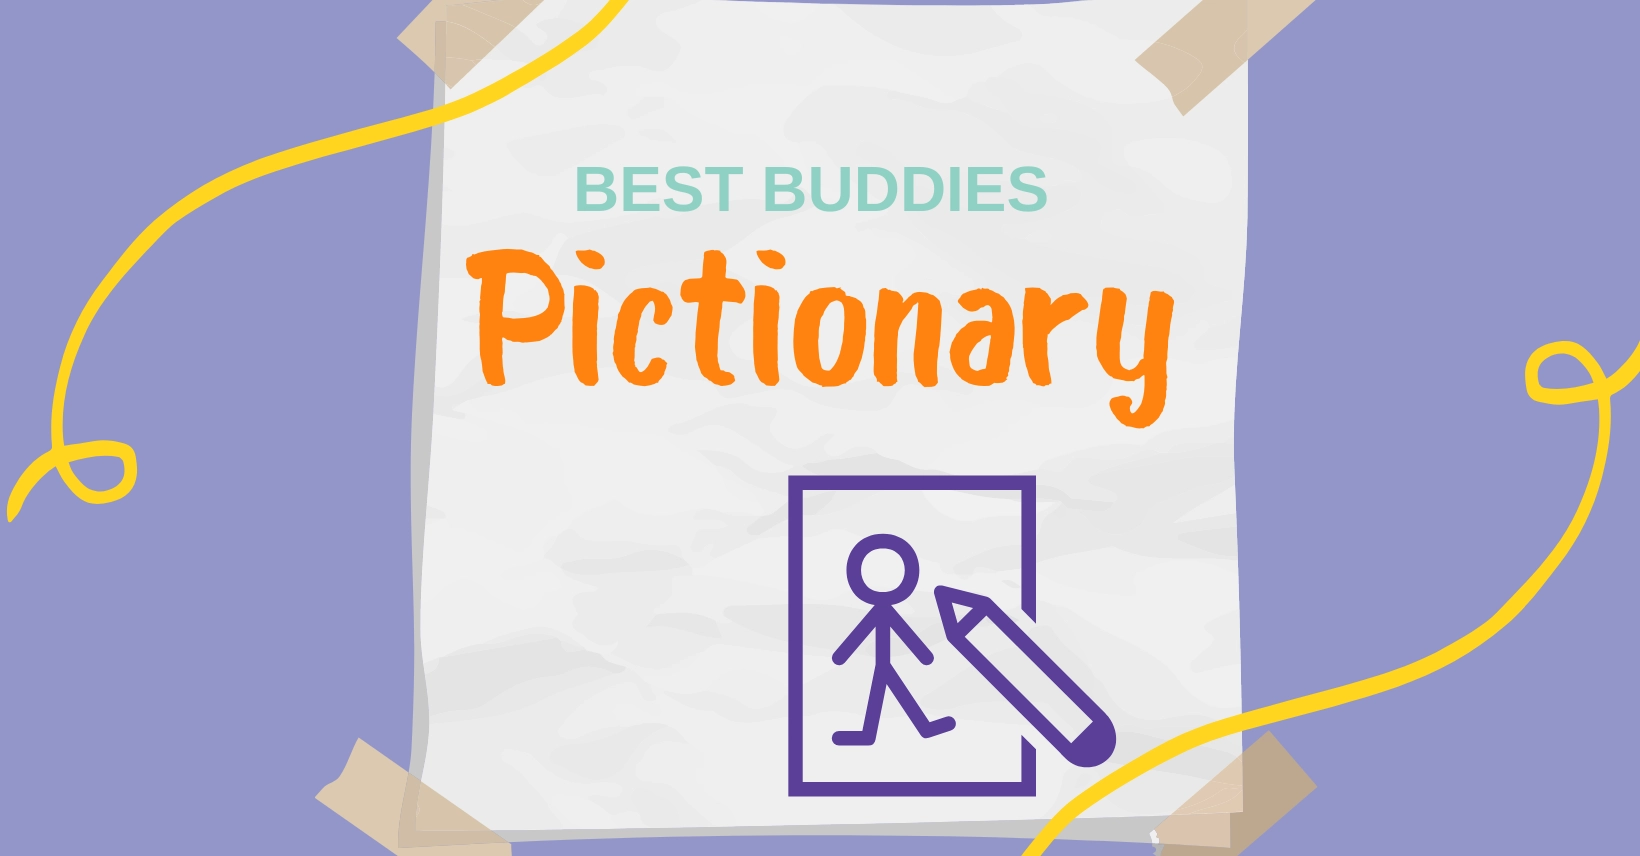 Best Buddies pictionary event graphic